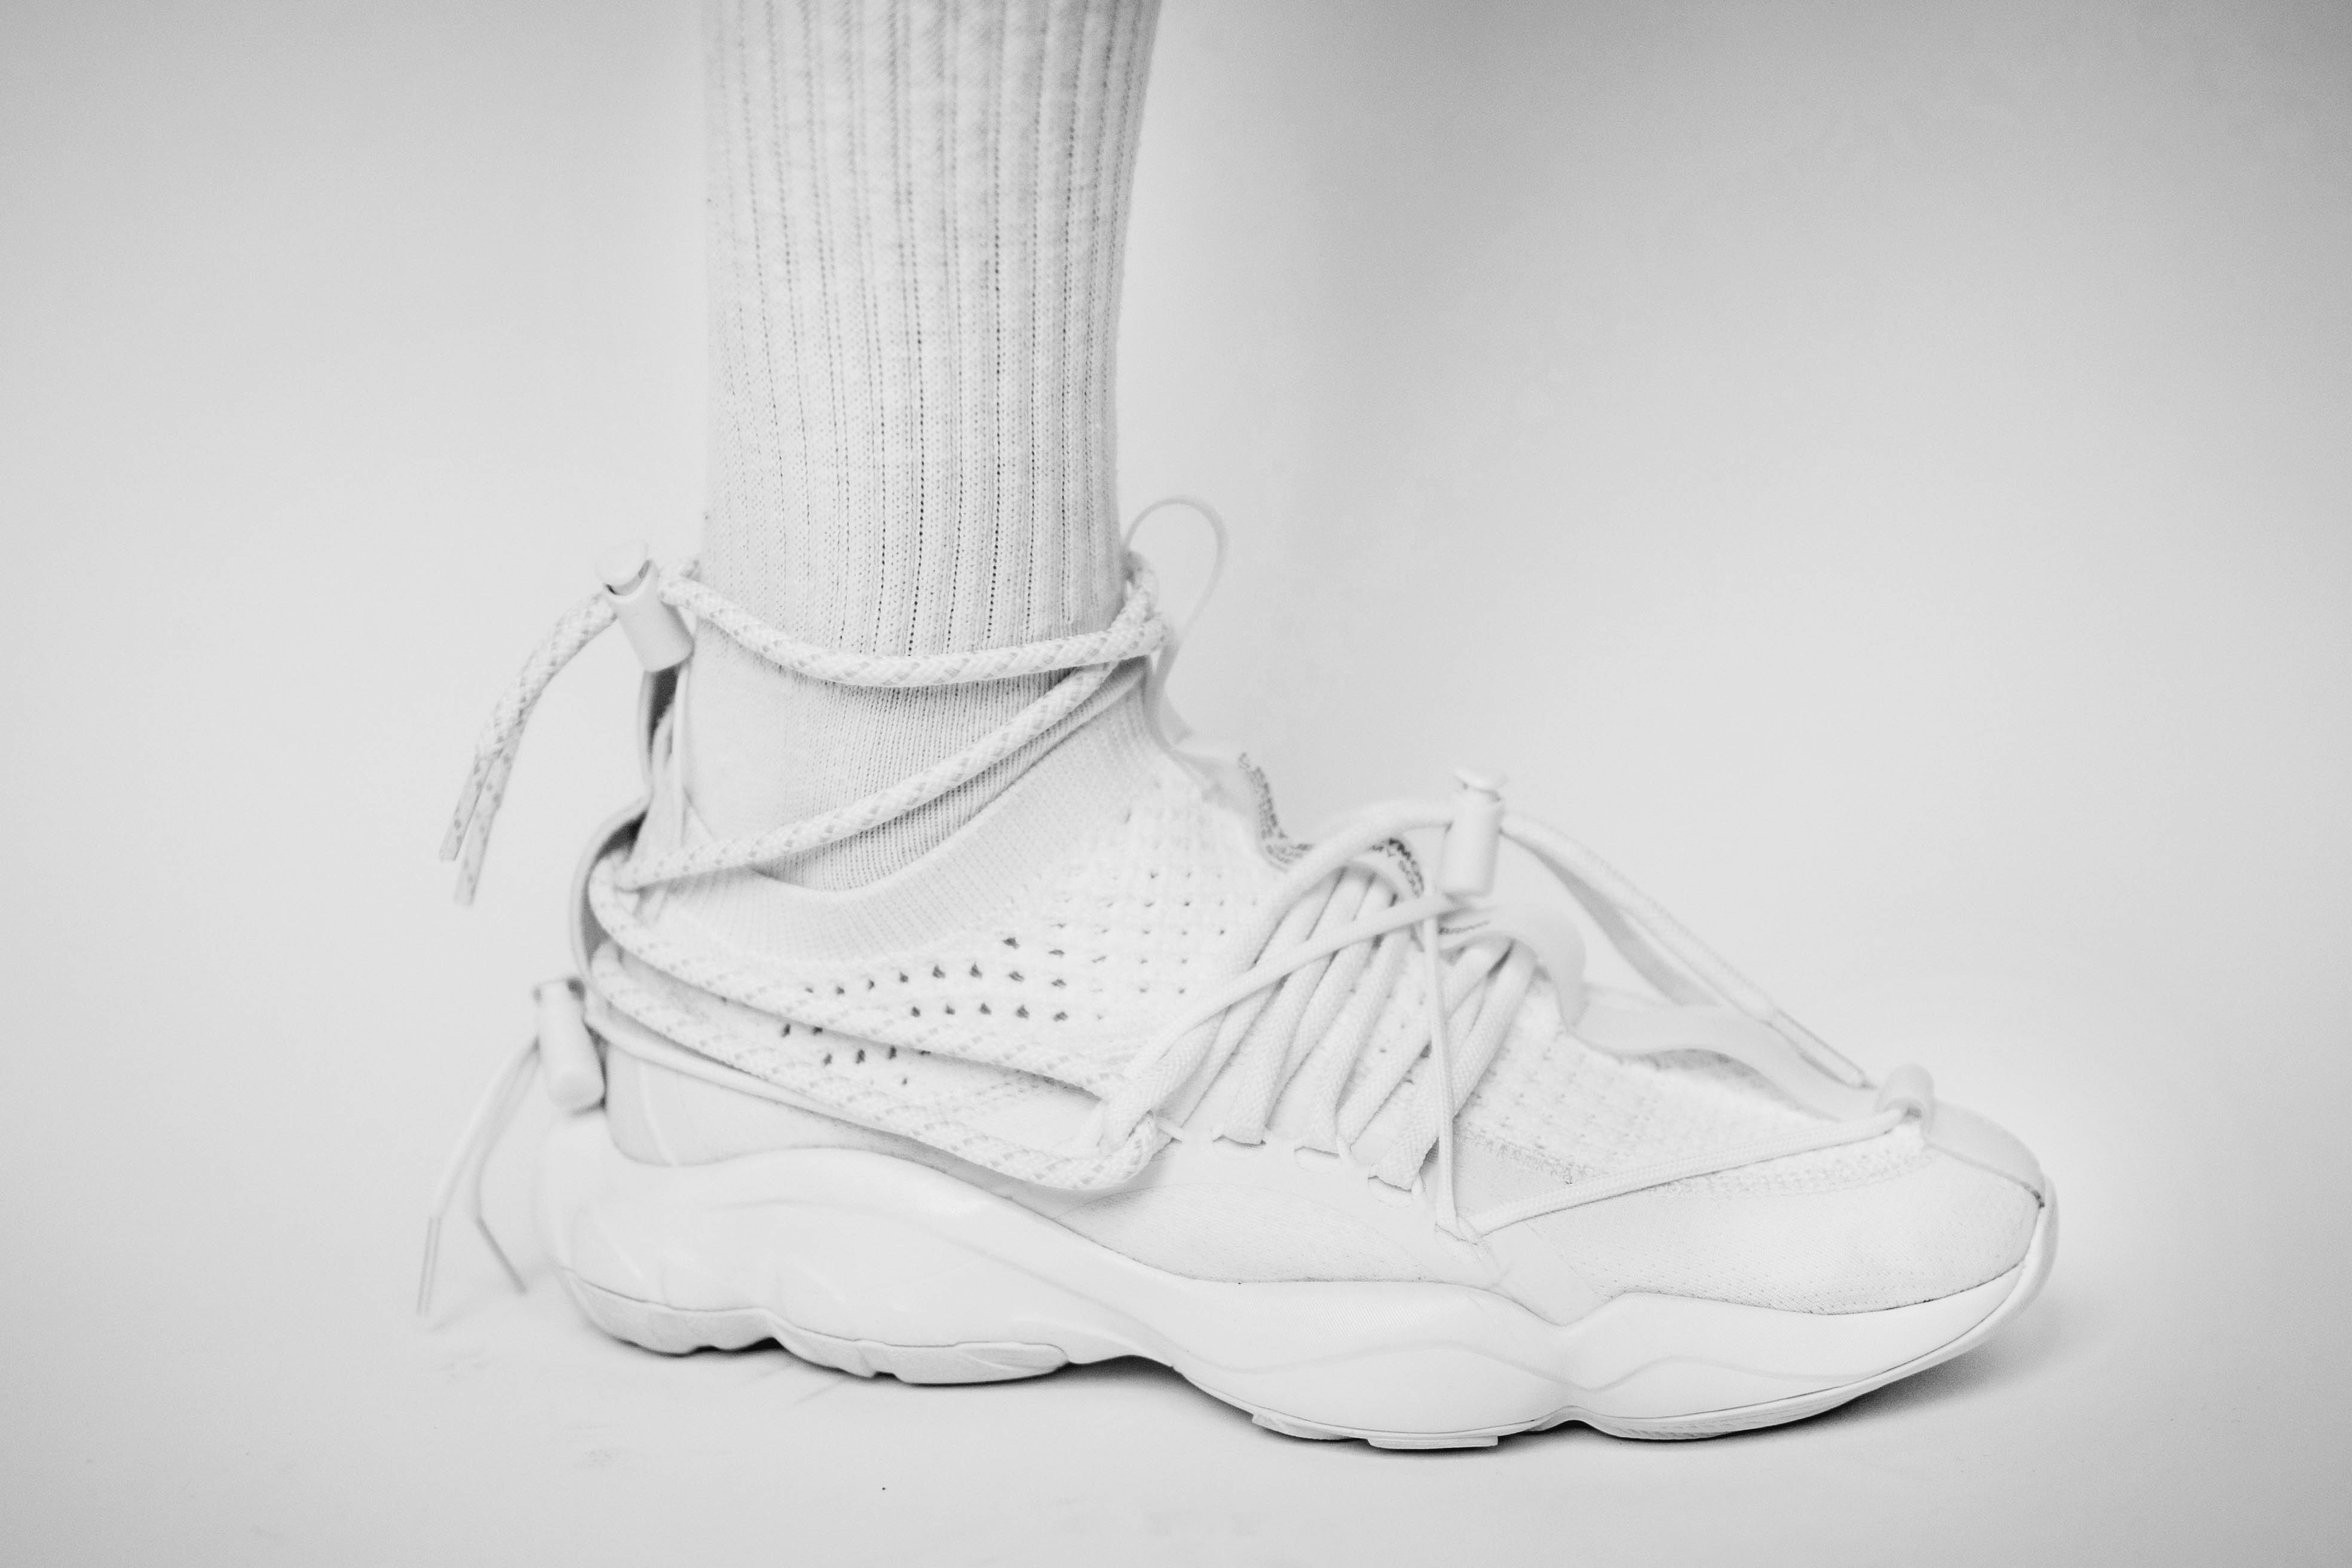 Pyer Moss x Reebok Sneaker Collaboration DMX Fusion 1 Experiment New York Fashion Week Fall Winter 2018 Collection